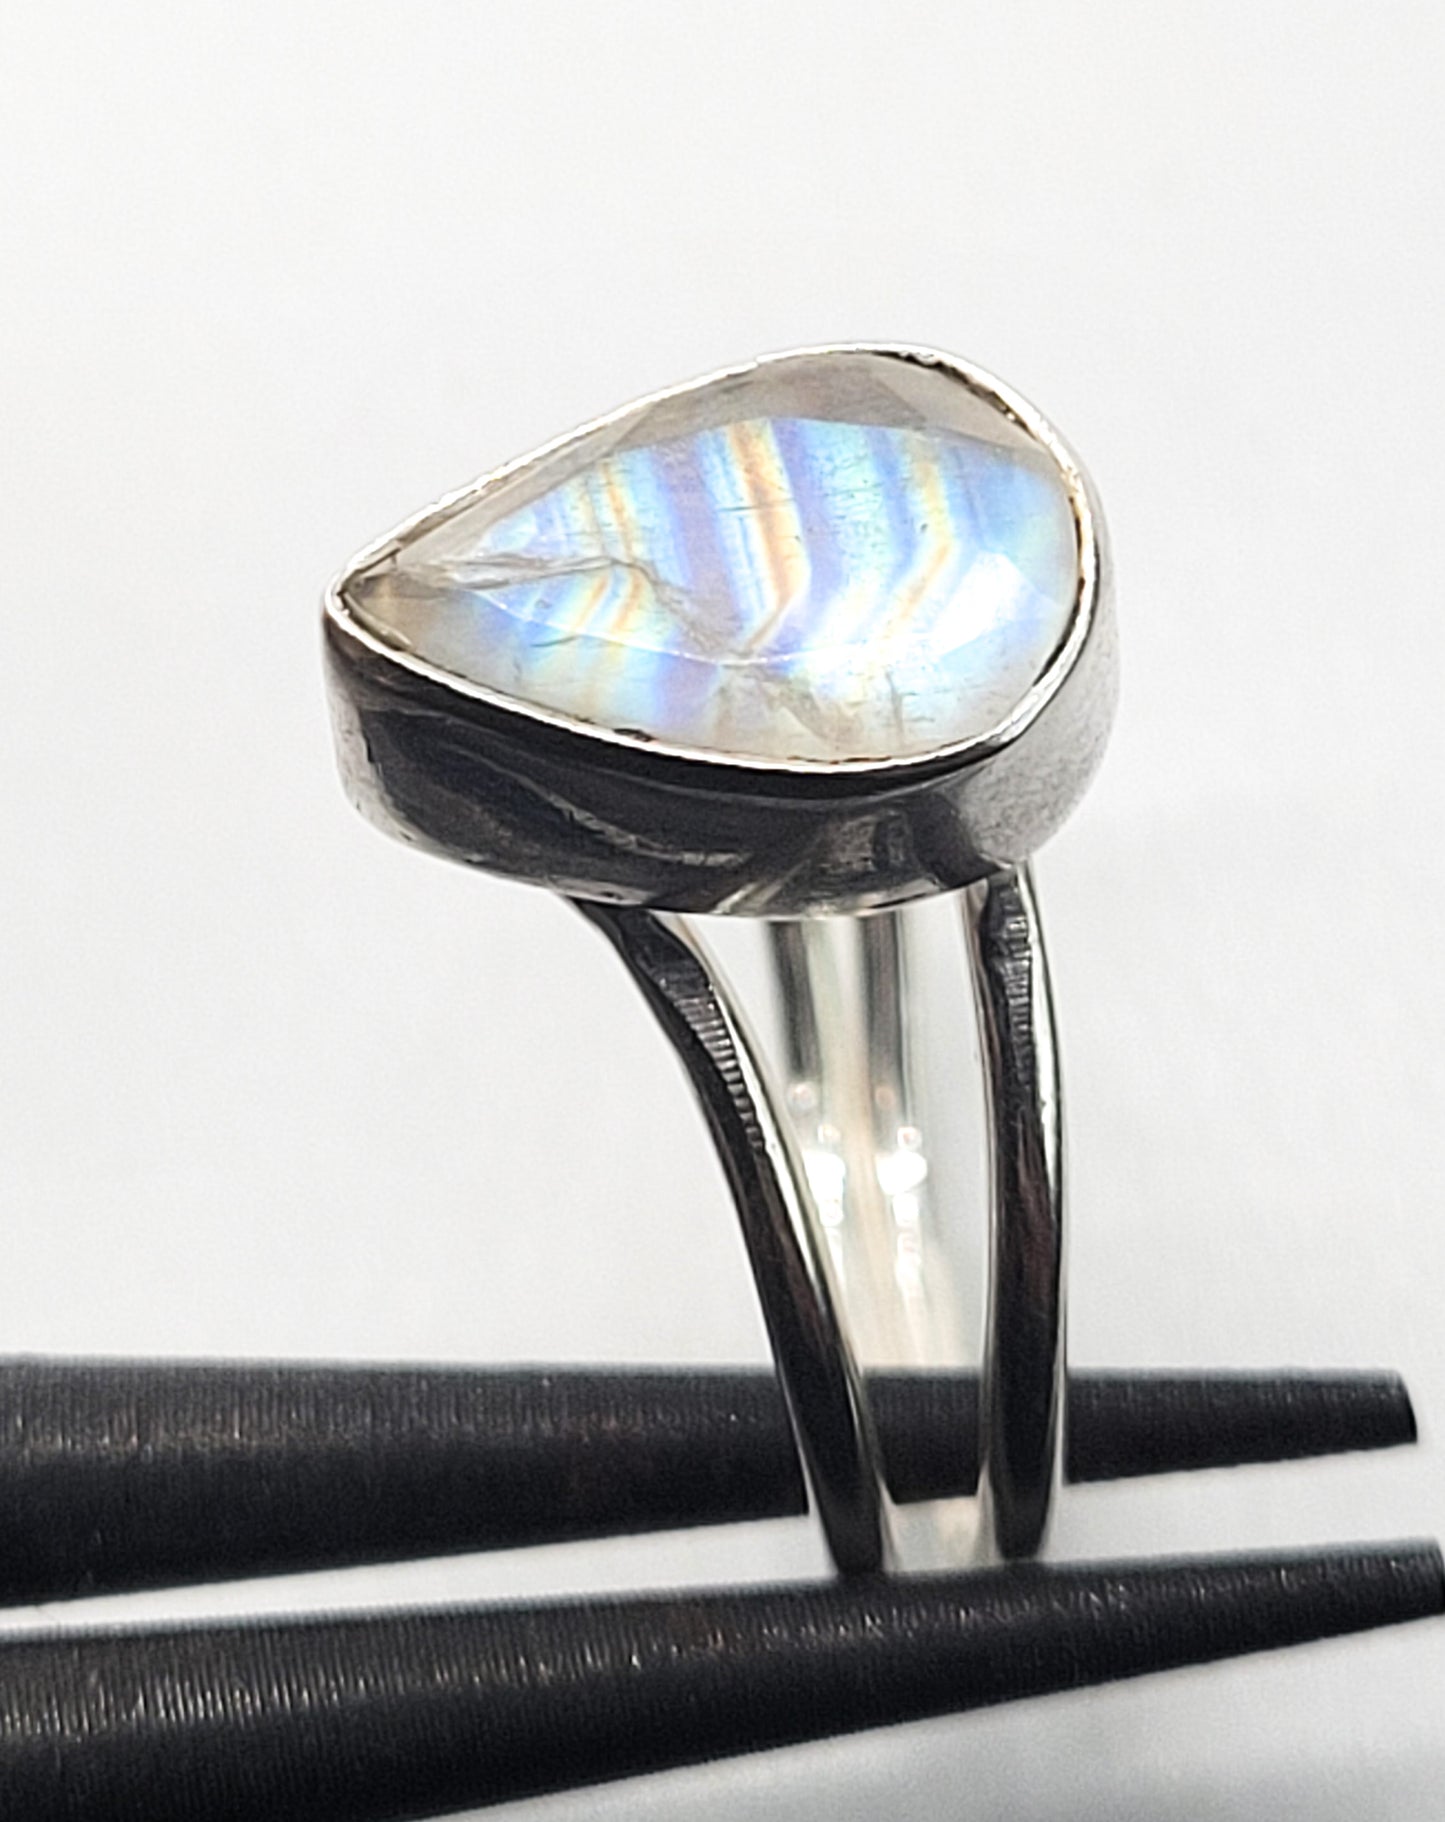 Rainbow flash faceted pear cut moonstone split shank sterling silver ring size 9